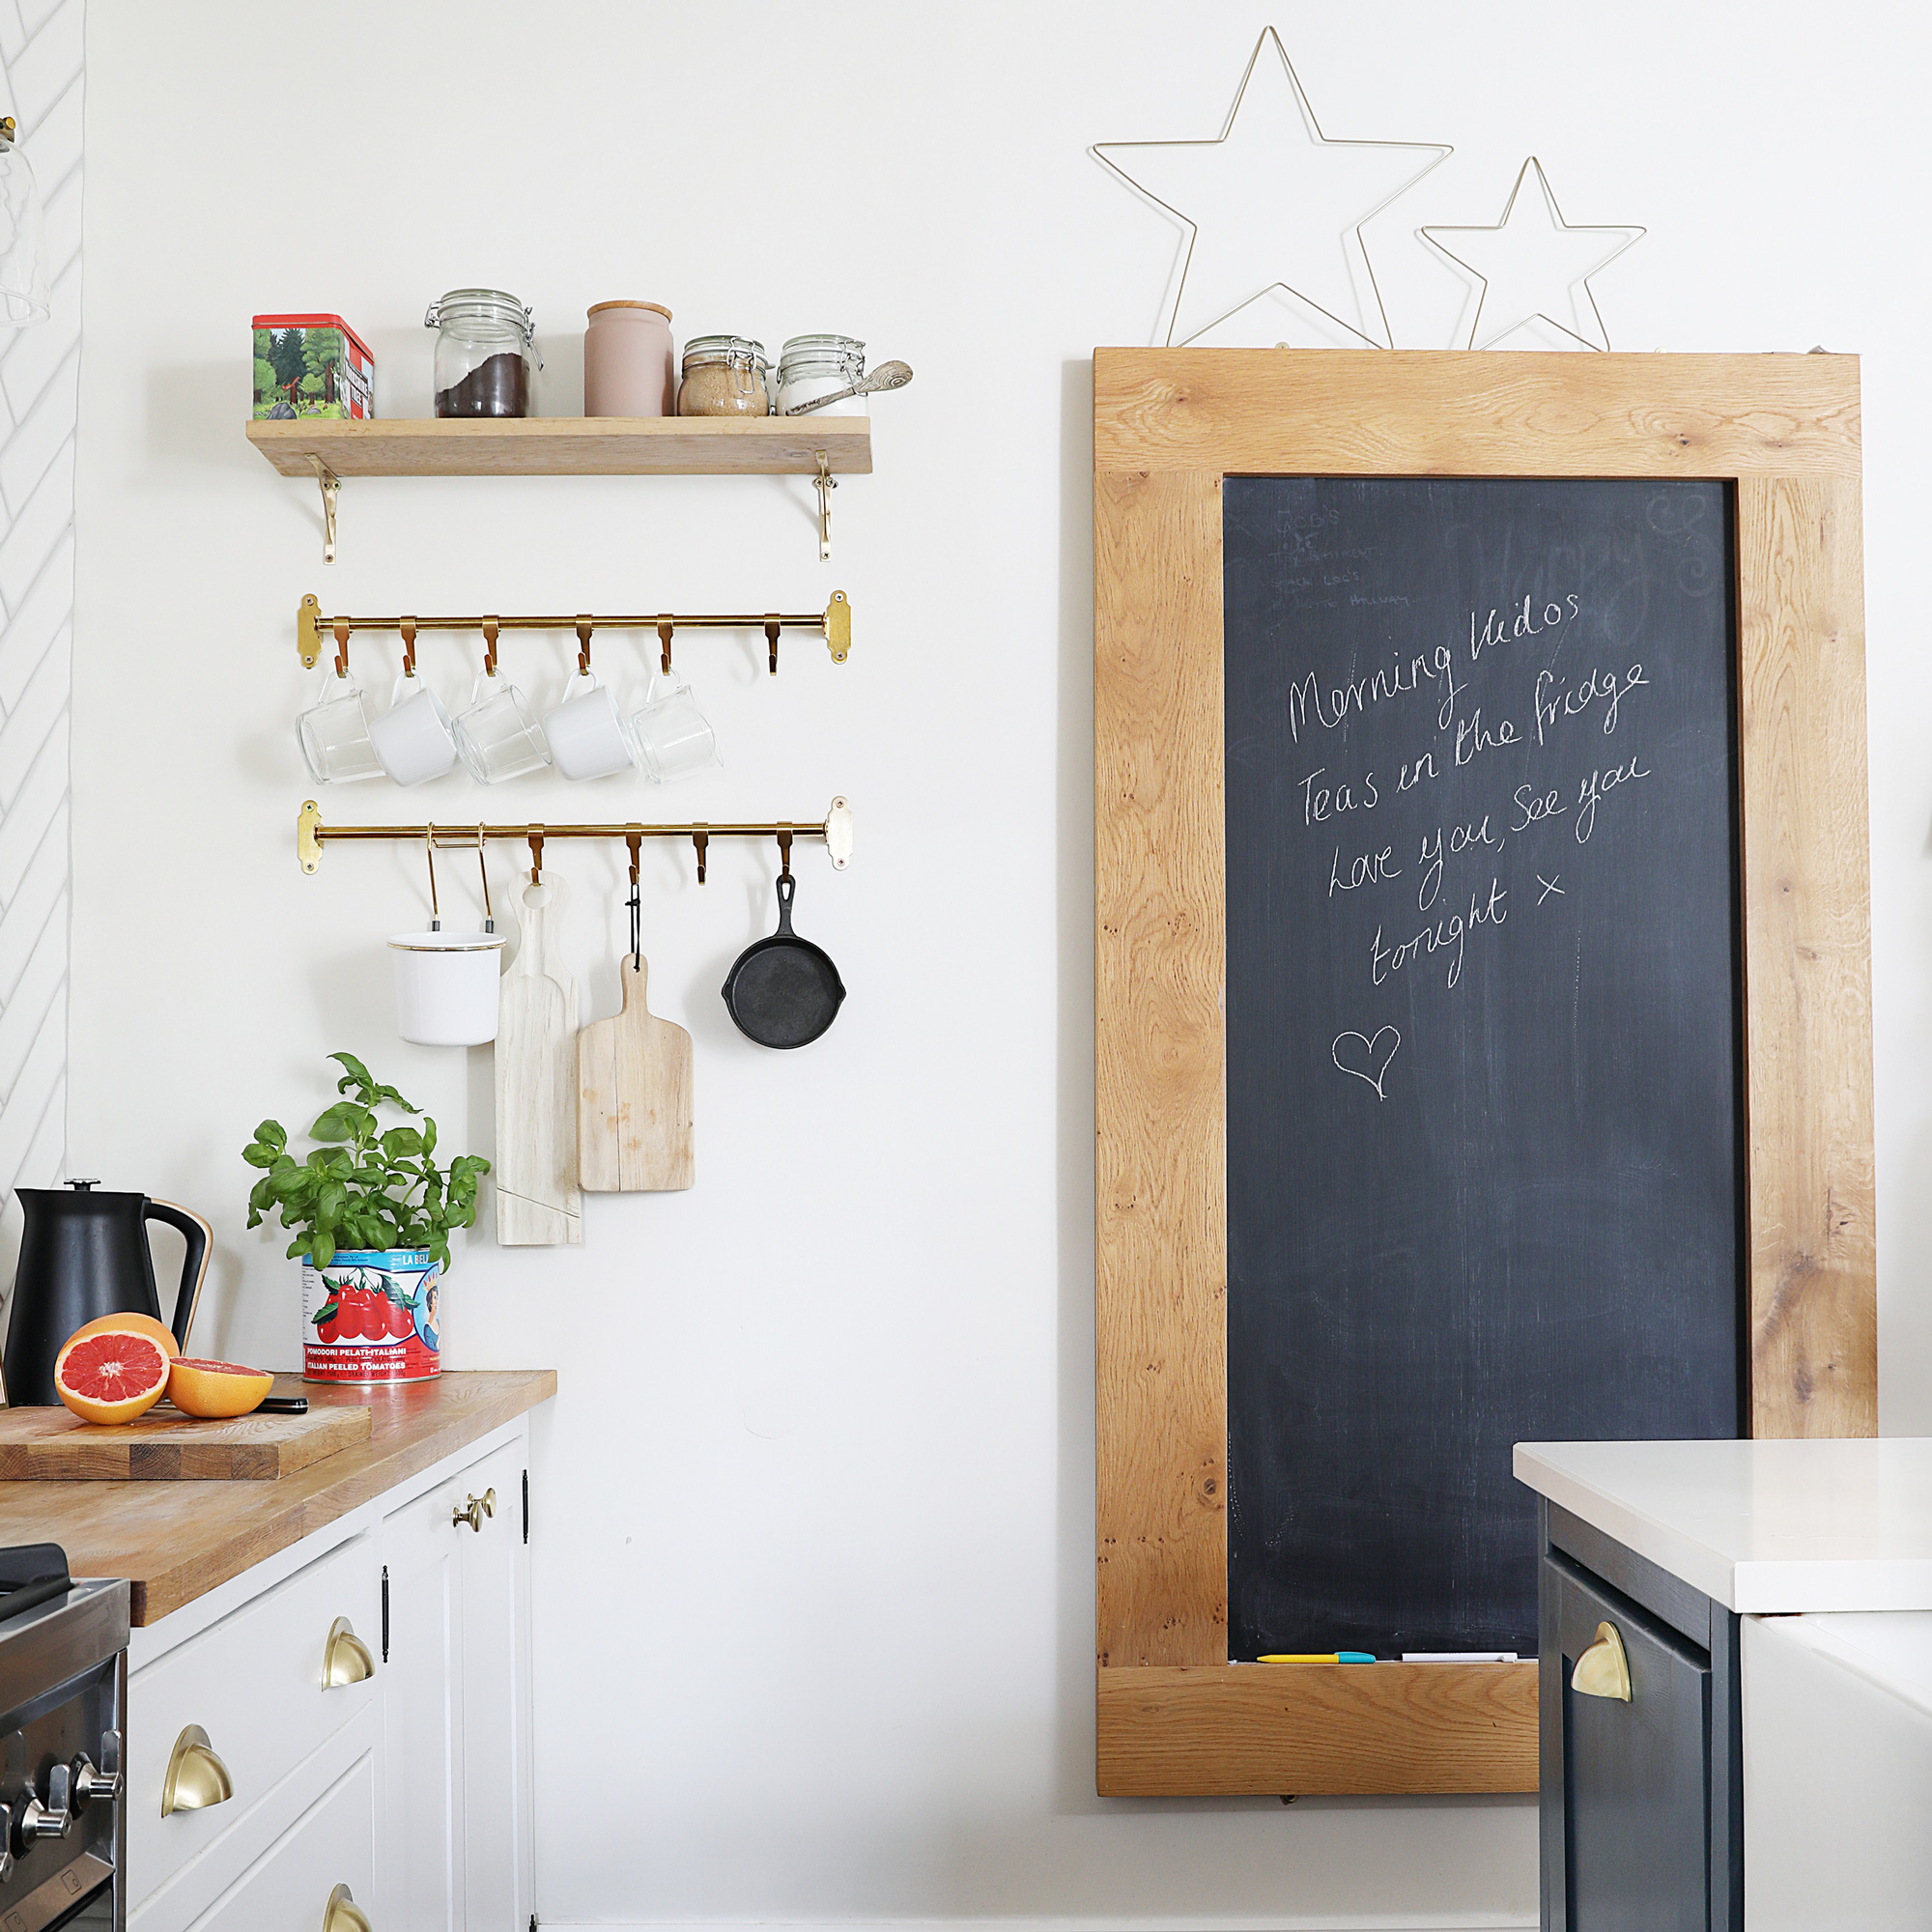 Victorian property revamp with open plan kitchen living area with chalkboard for messages